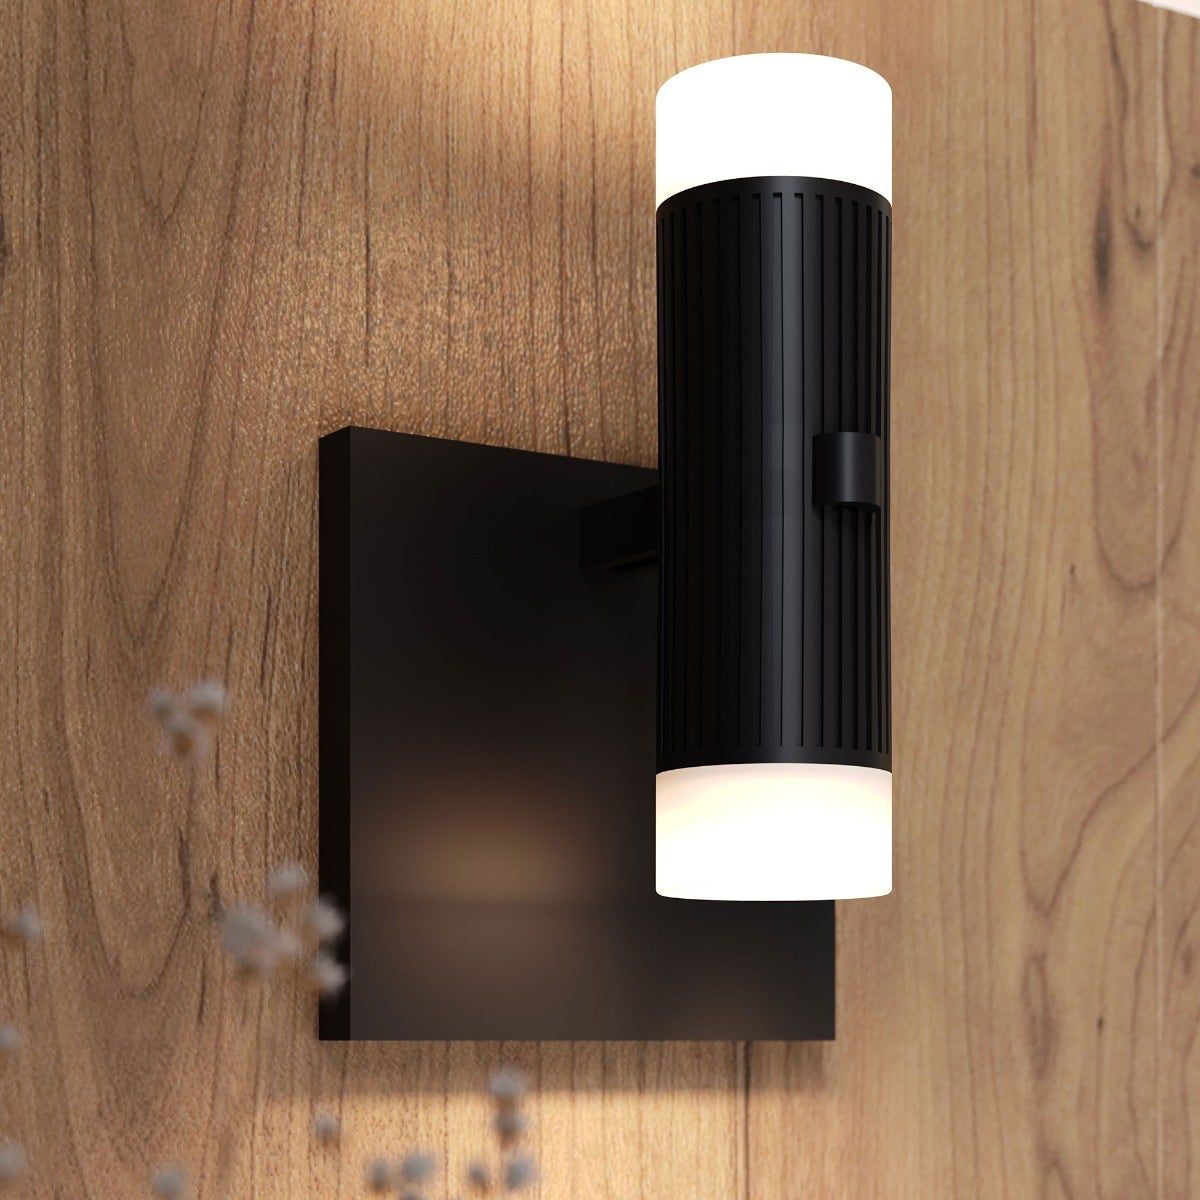 Suspenders Standard Single Sconce with Bar-Mounted Duplex Cylinders with Glass Drum Diffusers